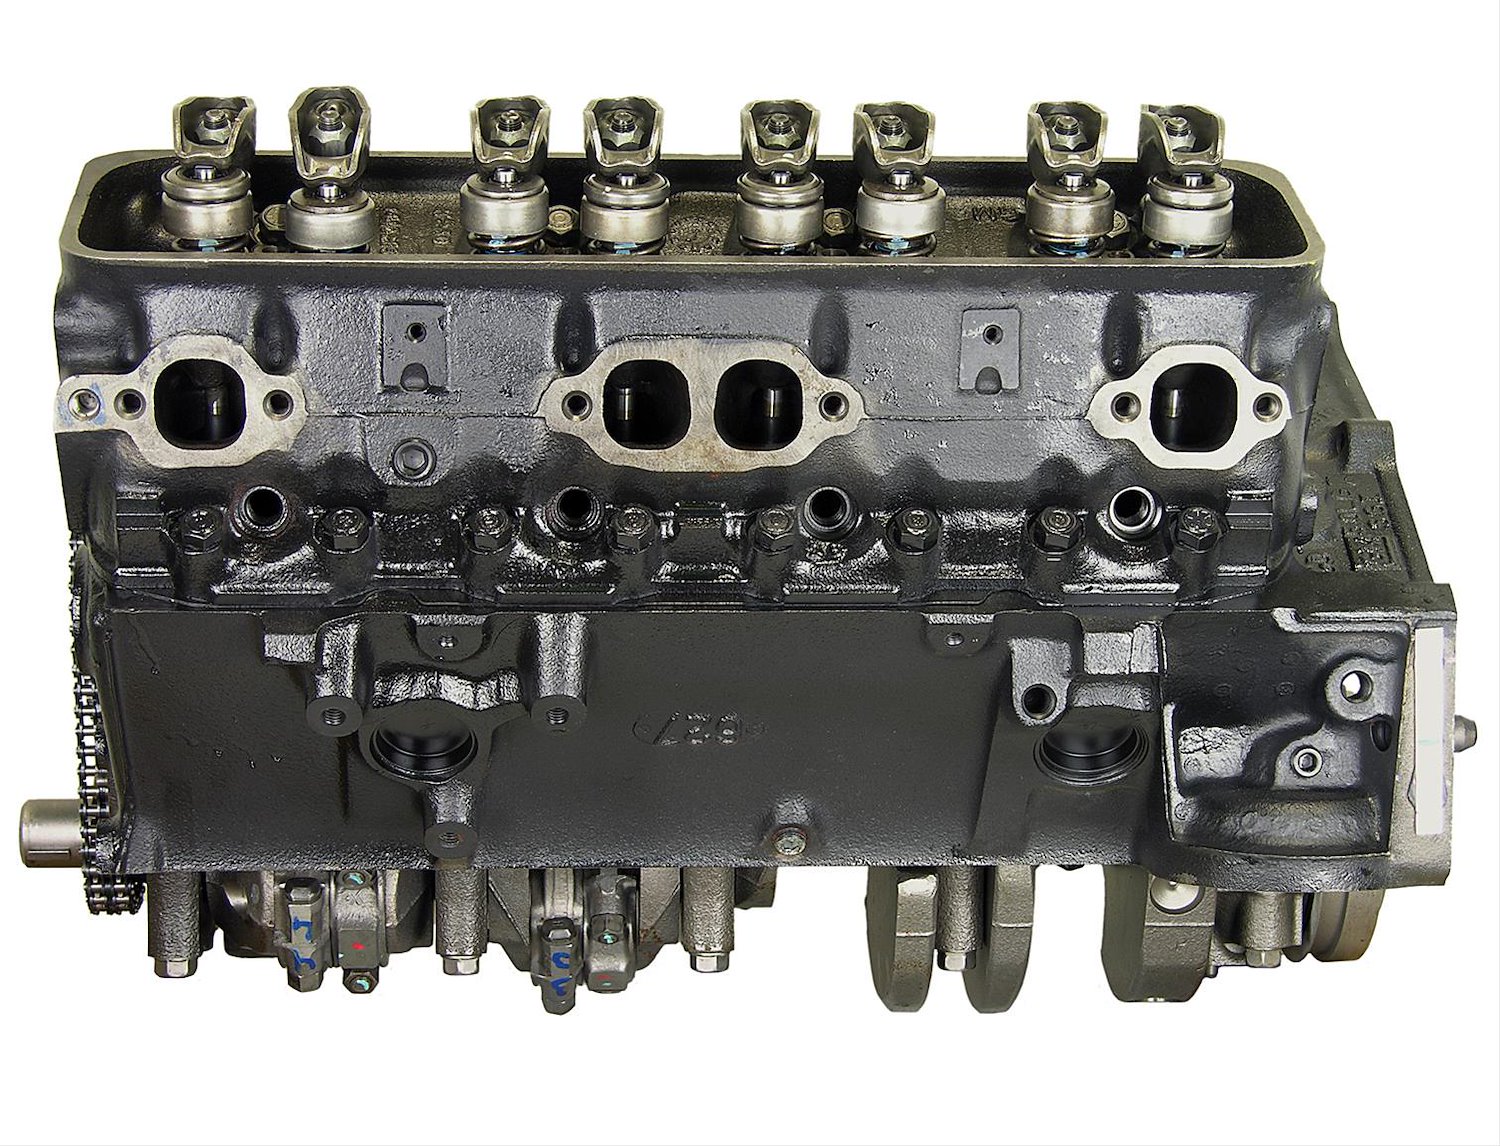 STANDARD ROTATION 200 & 230 HP 1 PIECE REAR MAIN SEAL VALVE COVERS BOLT DOWN CENTER HAS METAL TIMING